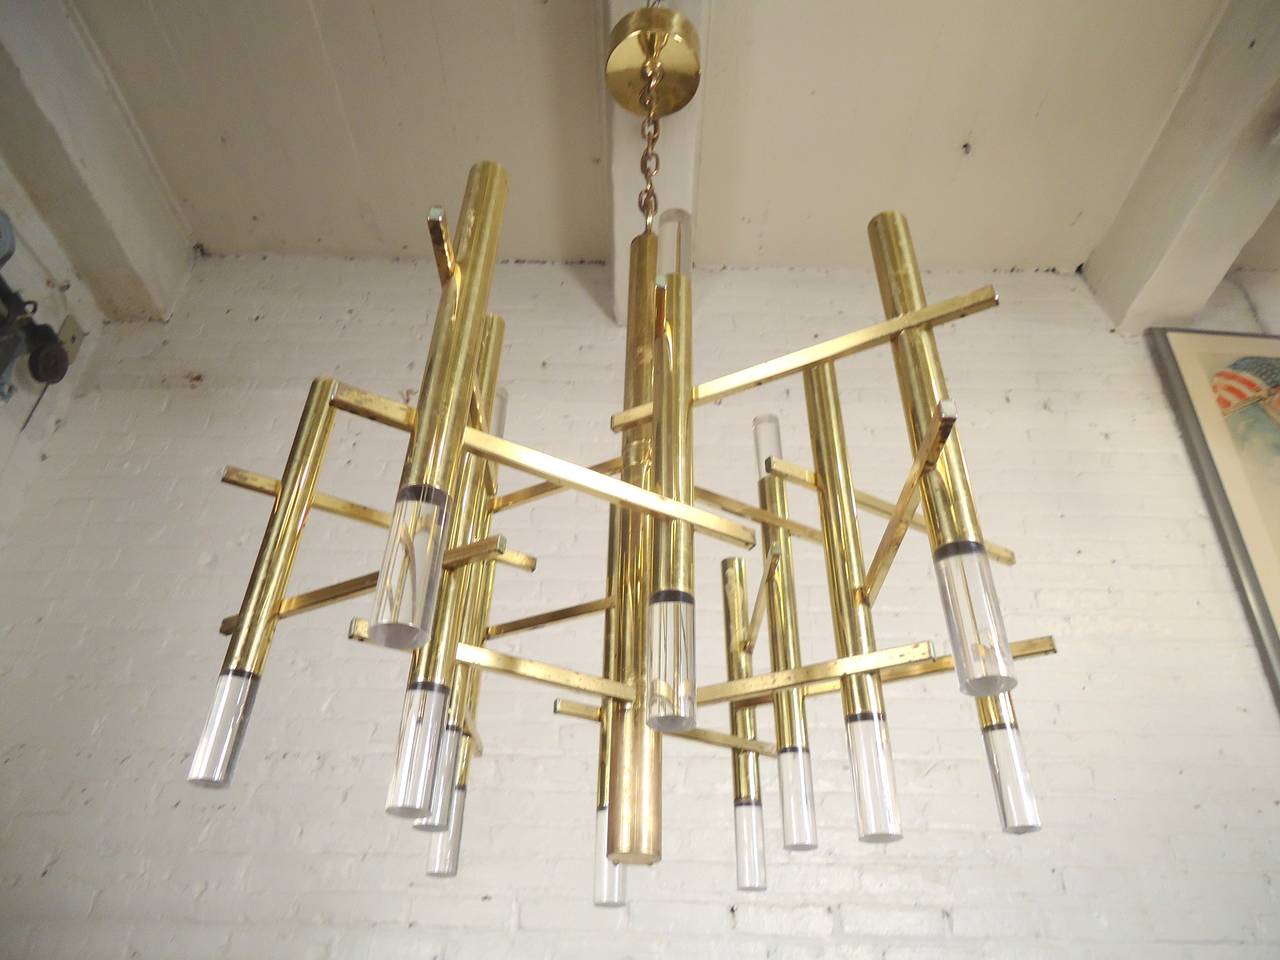 Vintage modern chandelier by Gaetano Sciolari featuring beautifully sculpted brass body and Lucite trim.

(Please confirm item location - NY or NJ - with dealer).